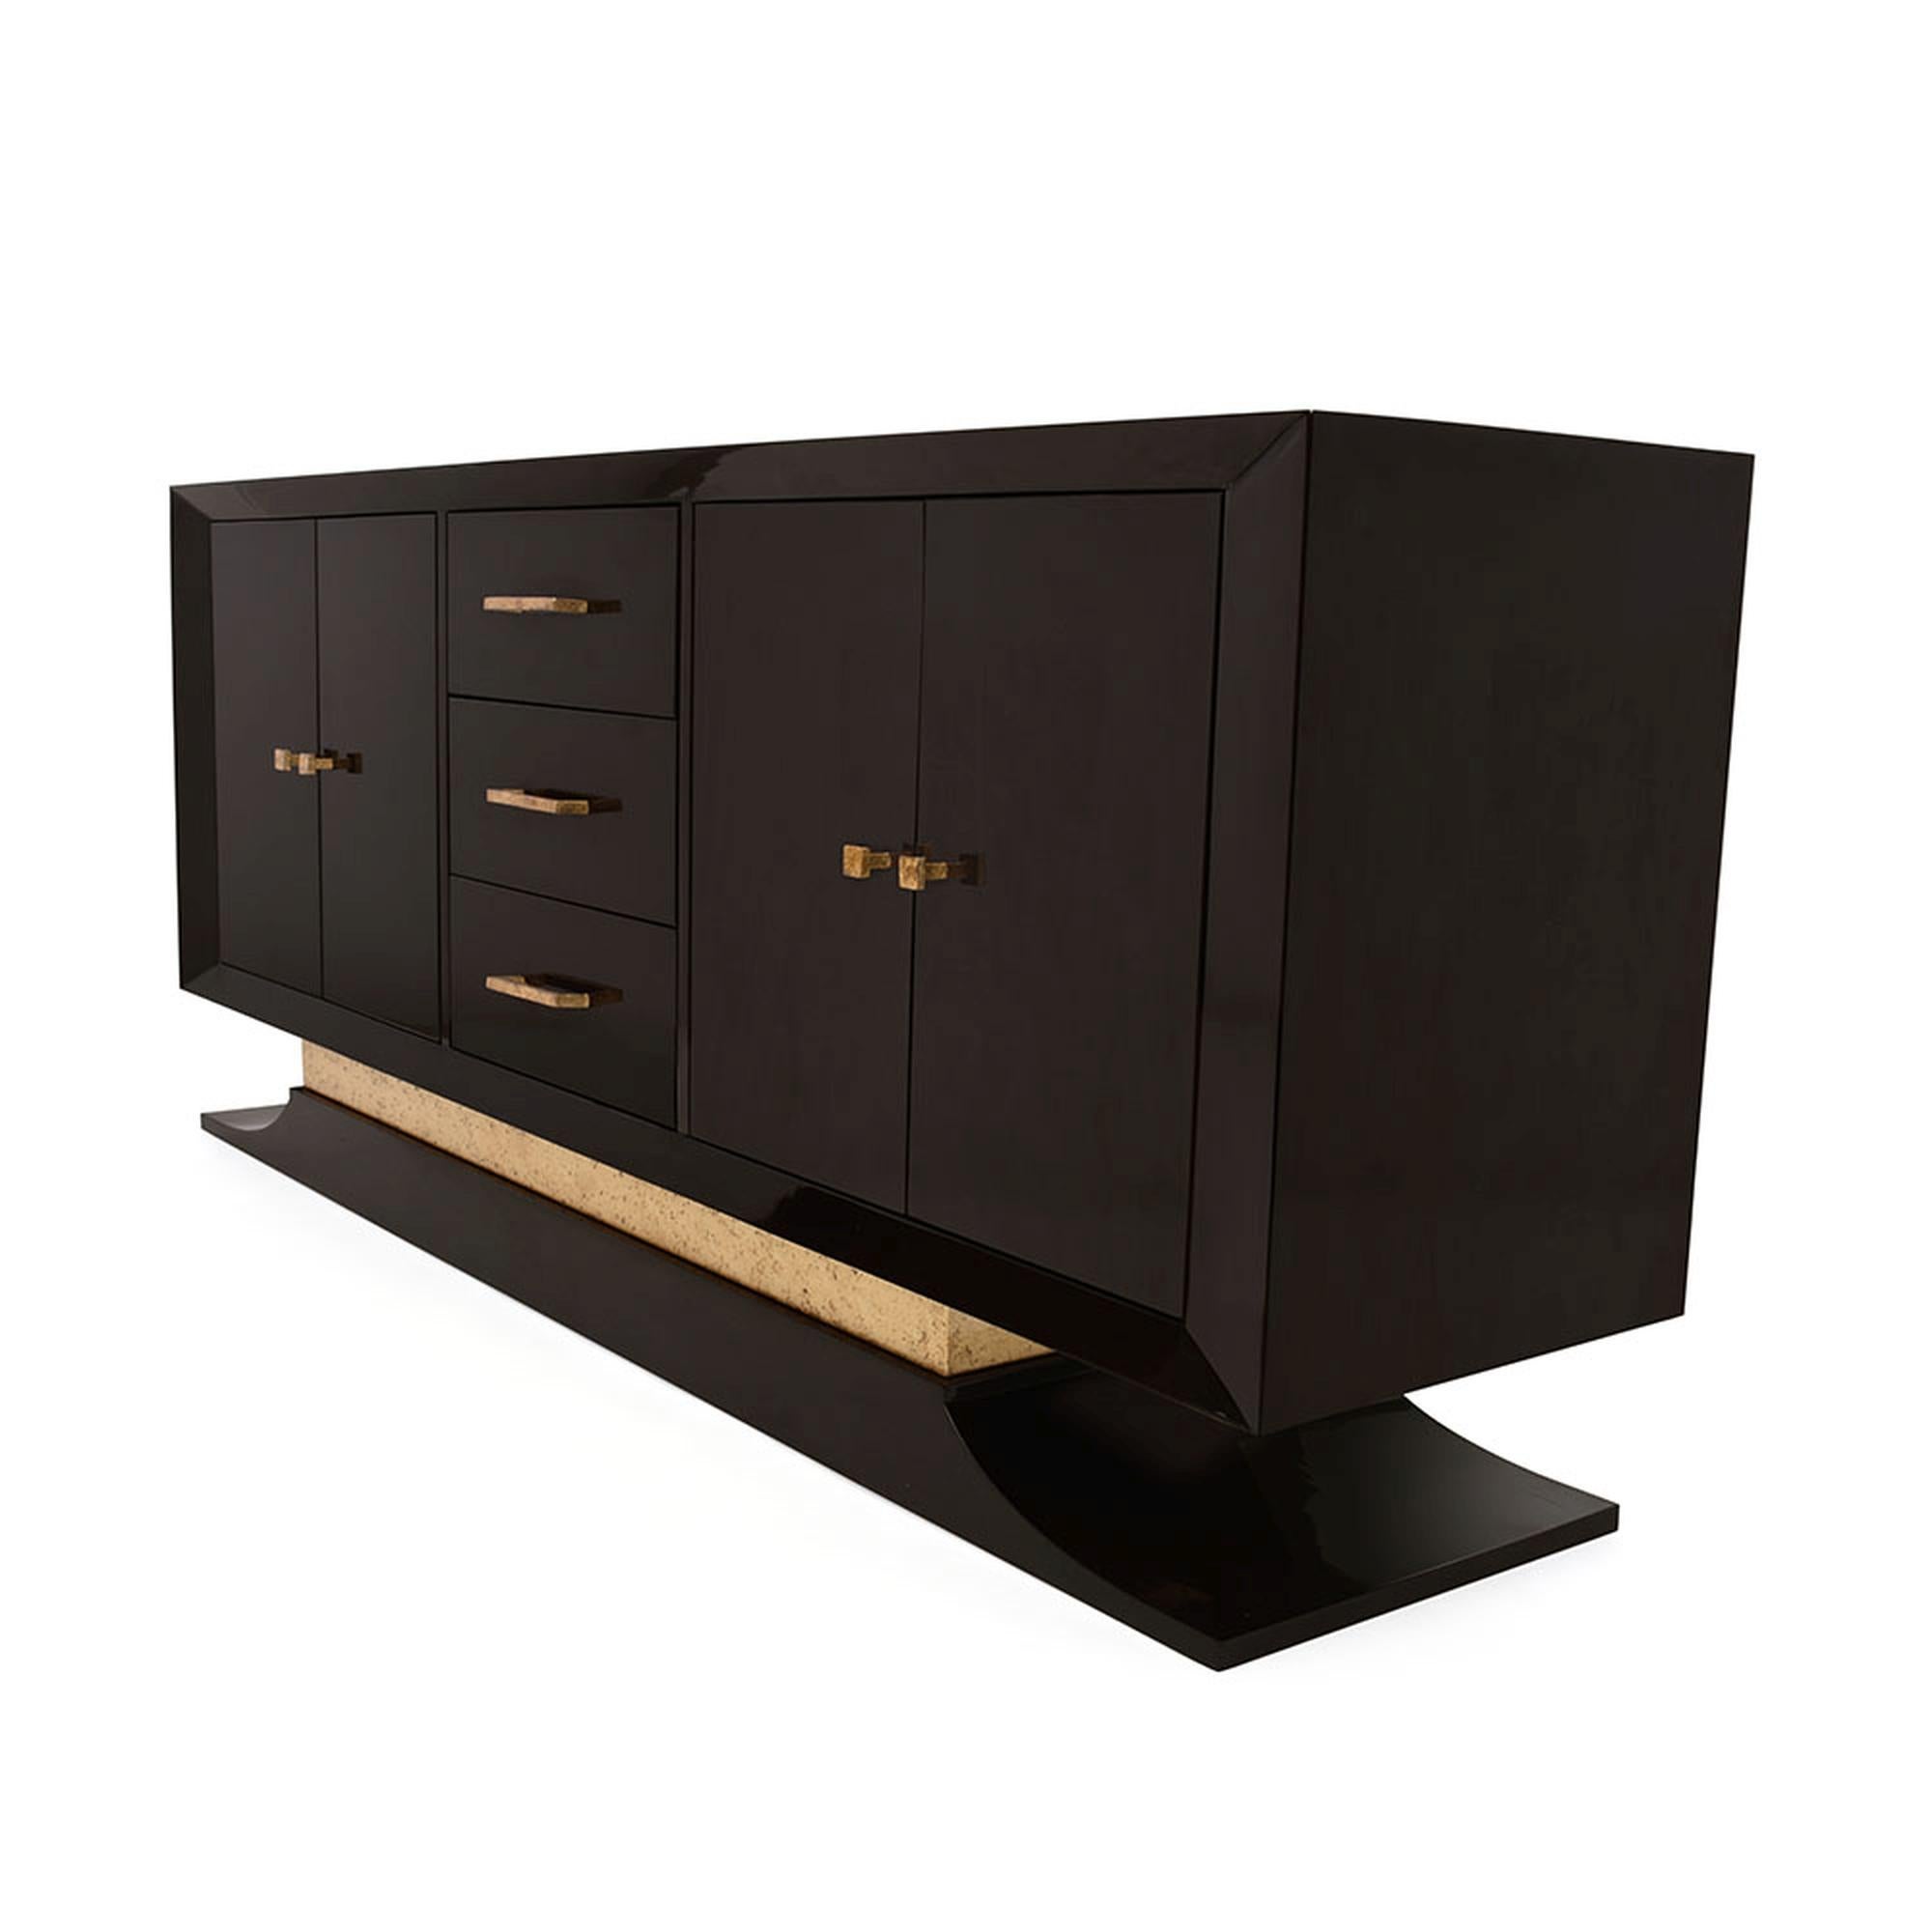 Exuding sophistication, and with a nod to old Hollywood glamour, The Bel Air credenza is a spectacular statement piece. Composed of a wood body and pedestal stand, this piece is supported by a raised metal base that has been hand-gilded and leafed